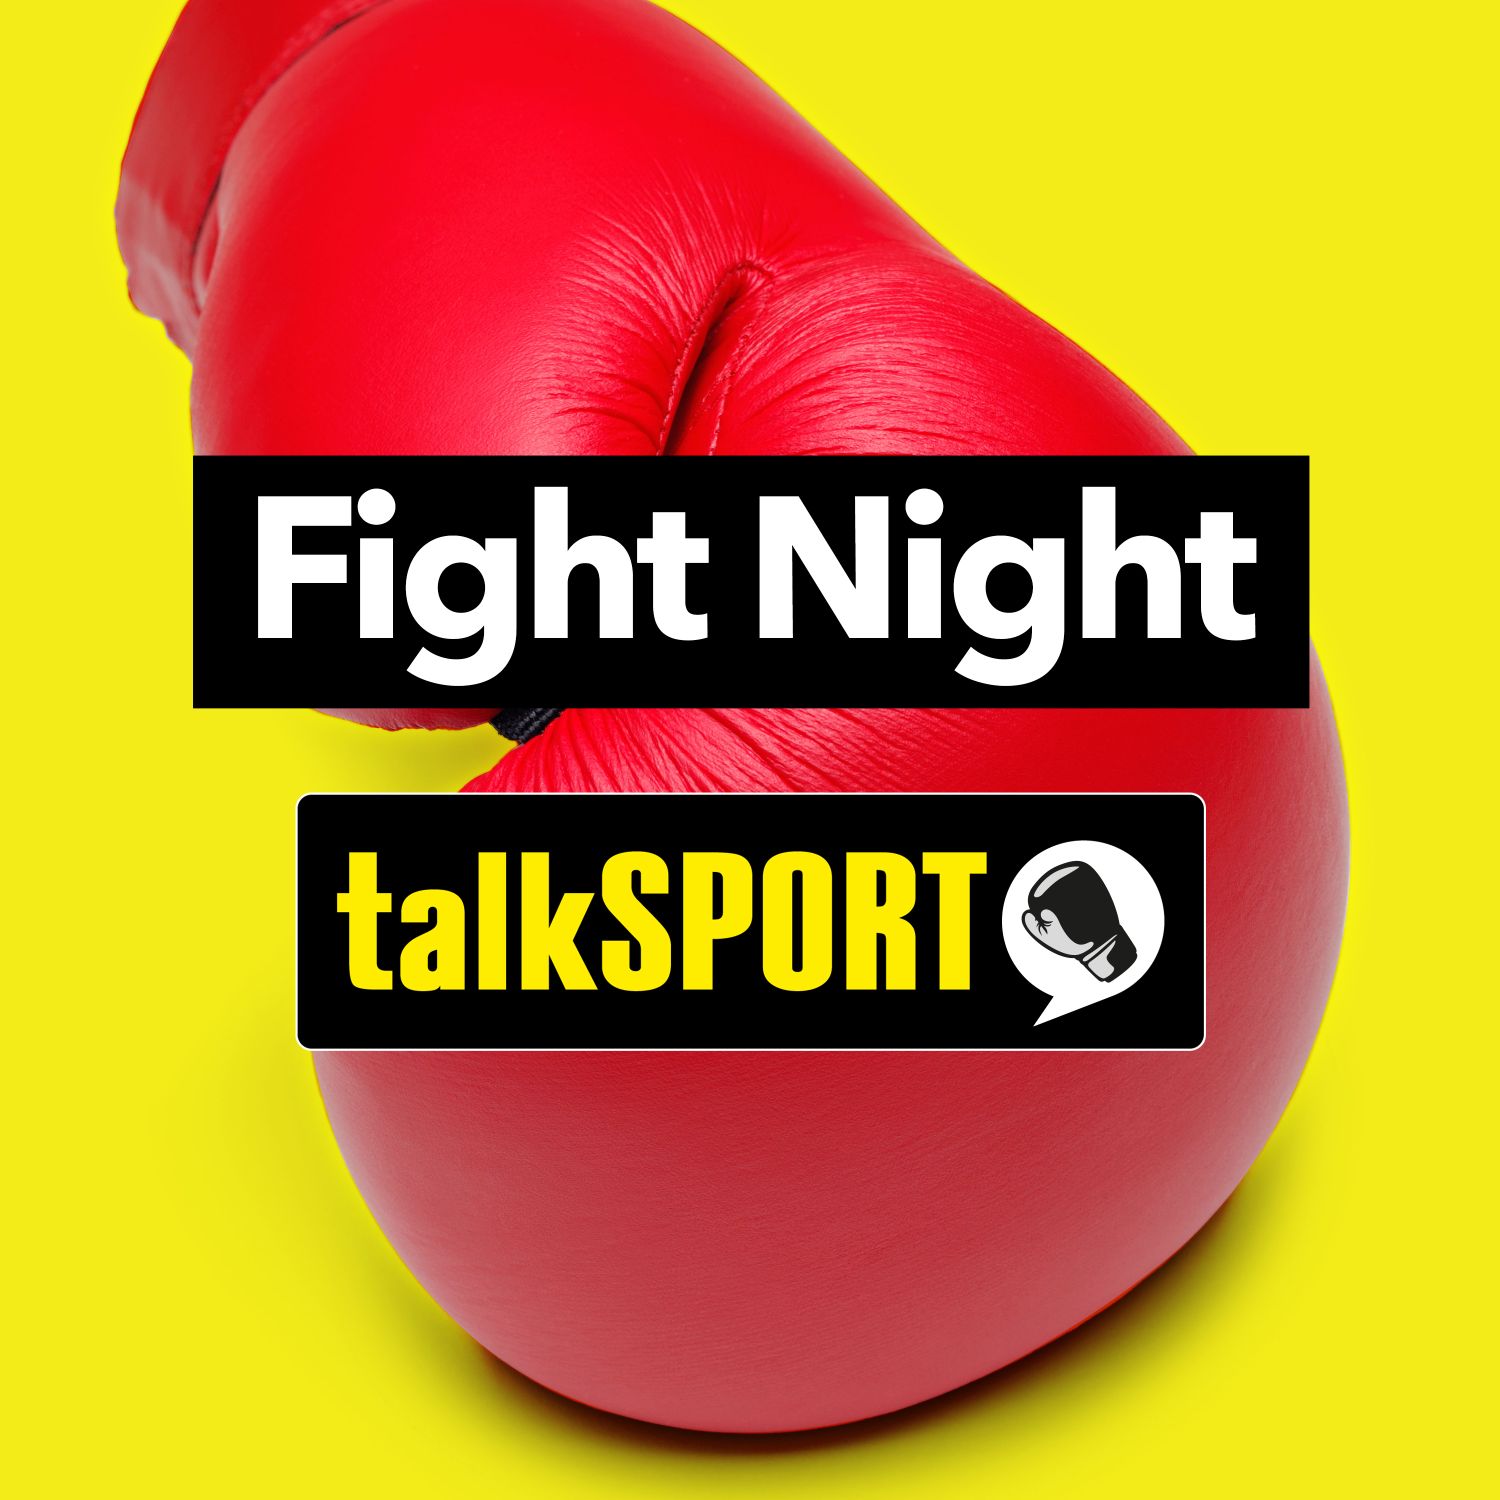 Fight Night Boxing Podcast